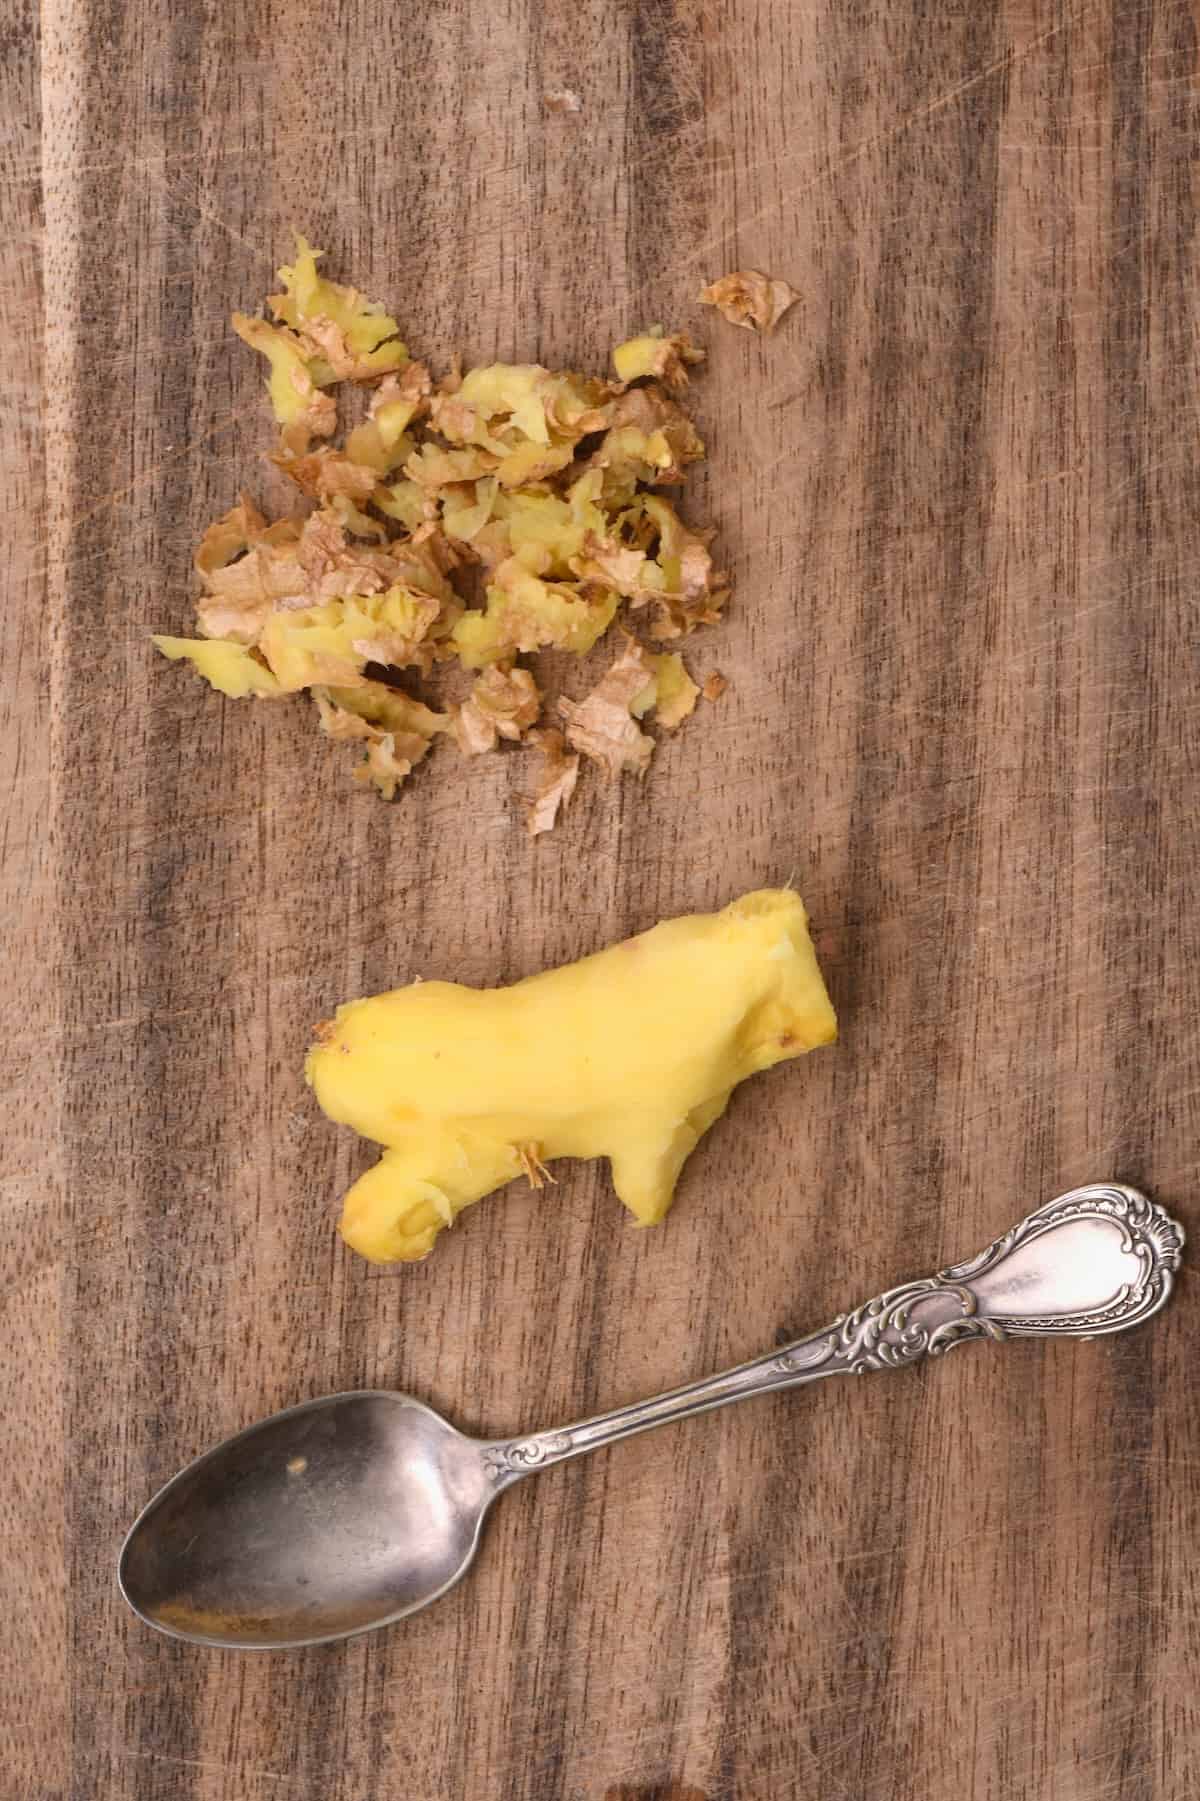 How to Peel Ginger (The Easy Way) 